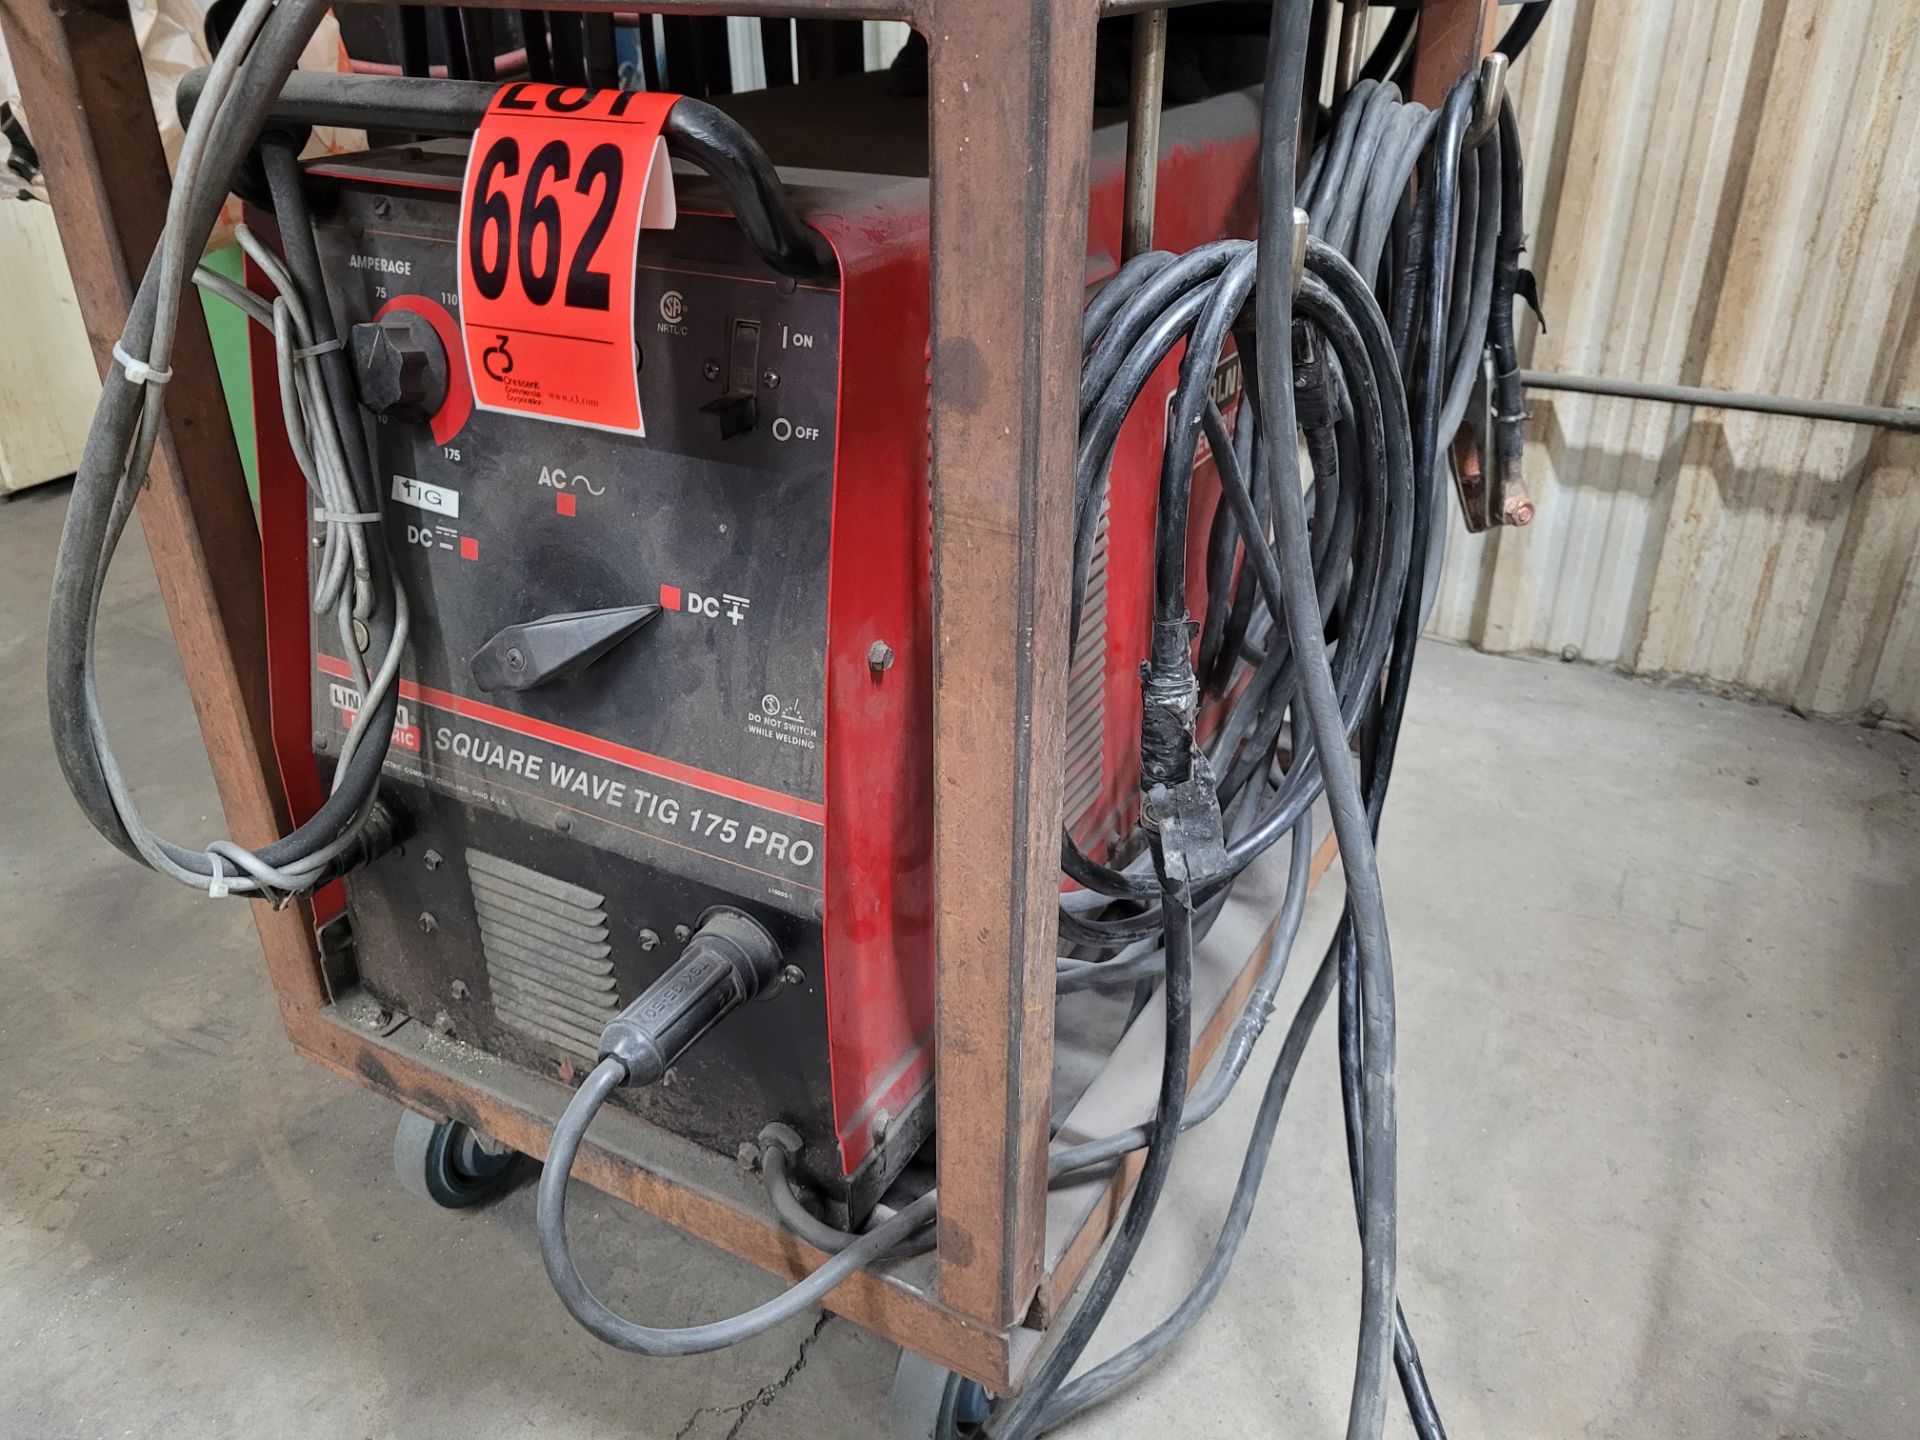 LINCOLN ELECTRIC Square Wave TIG 175 PRO with hoses, torch, clamps on steel 3-level cart and HOBART - Image 3 of 9